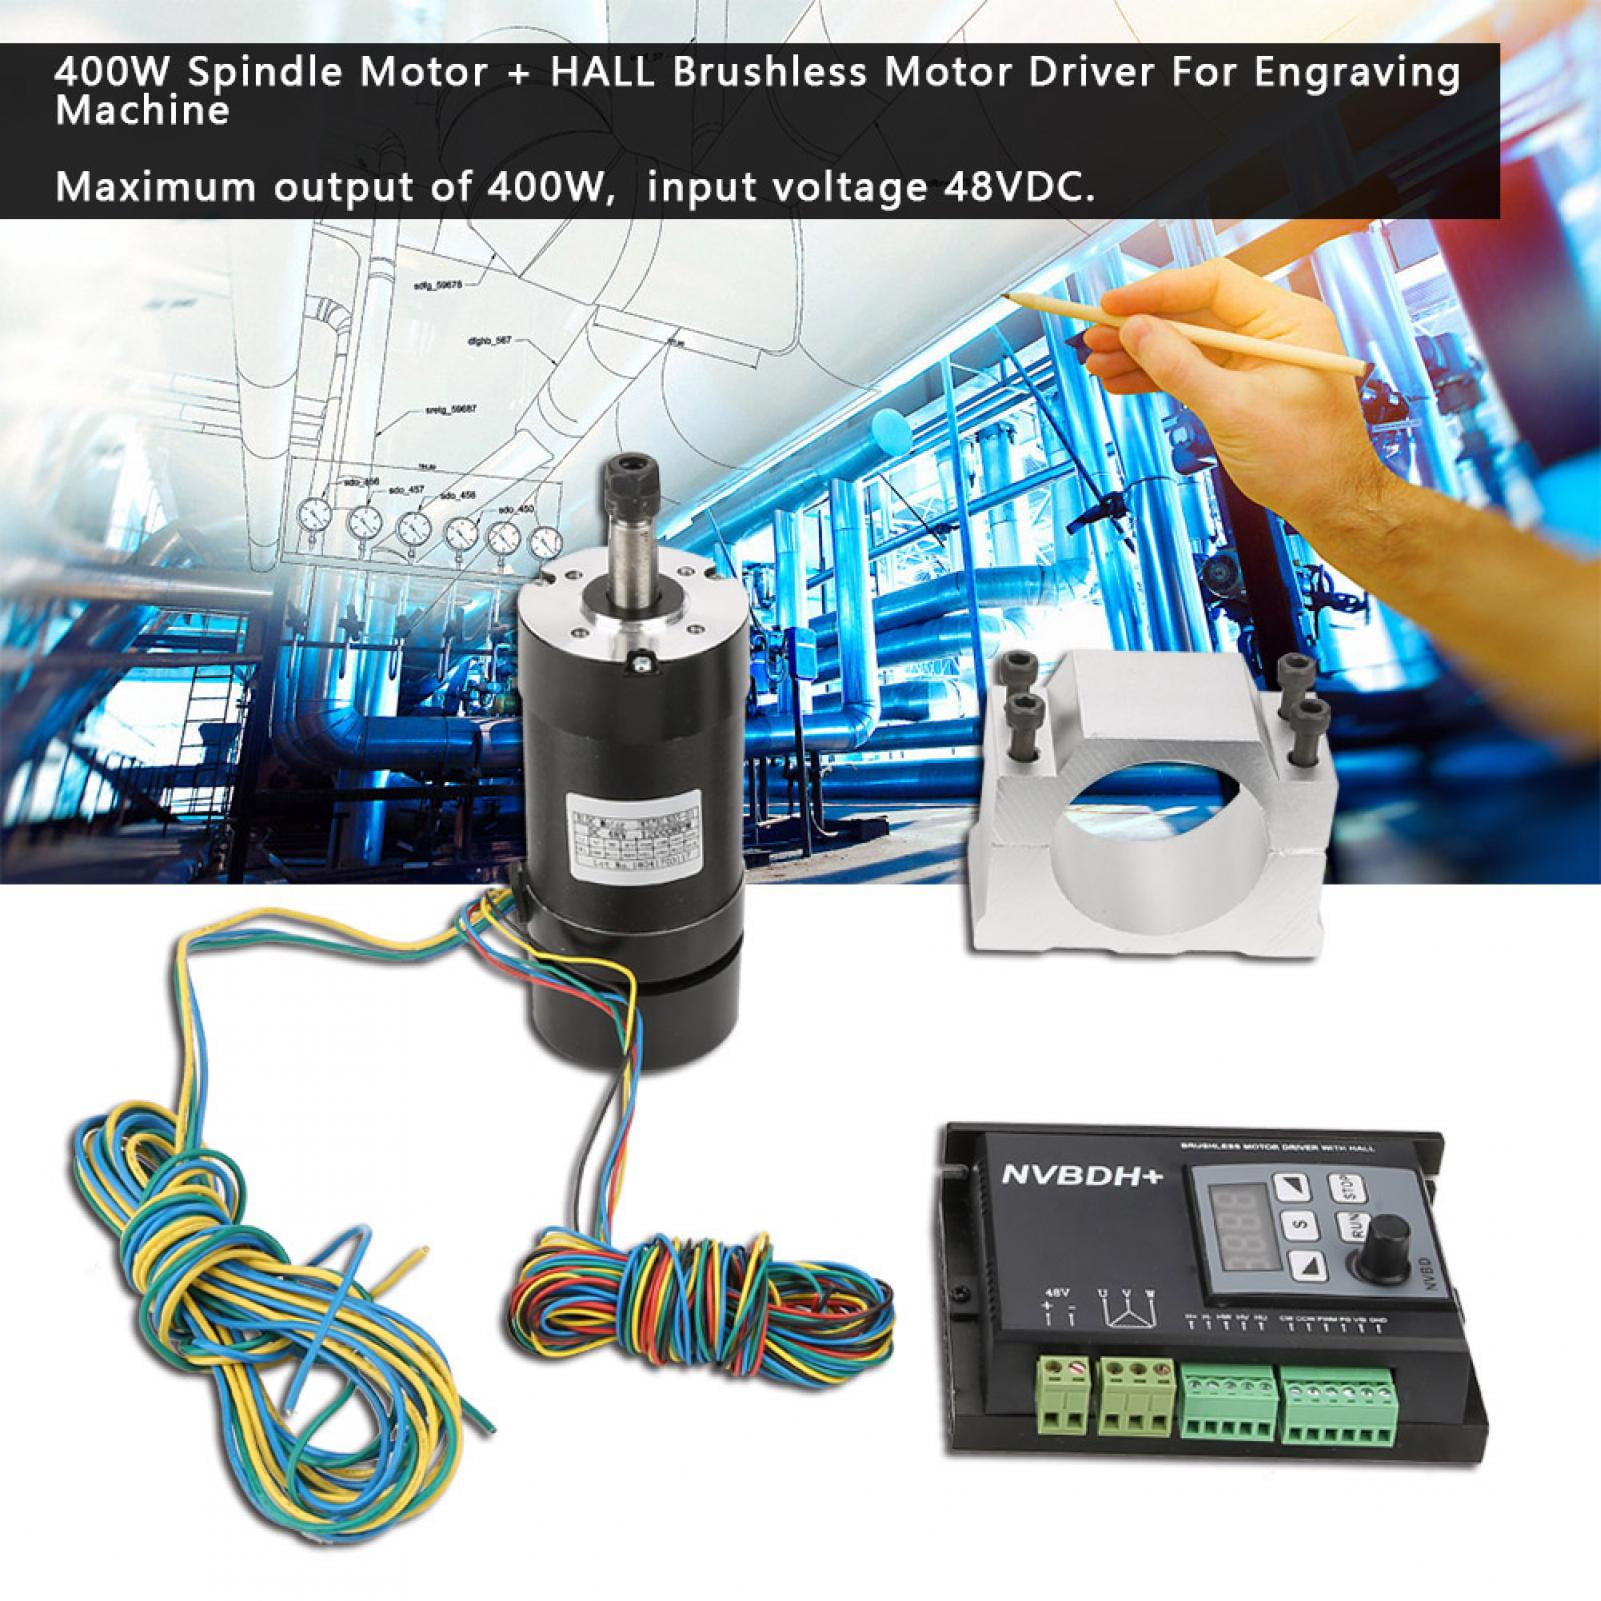 Brushless Motor Driver Controller without Hall for CNC Spindle Engraving Machine